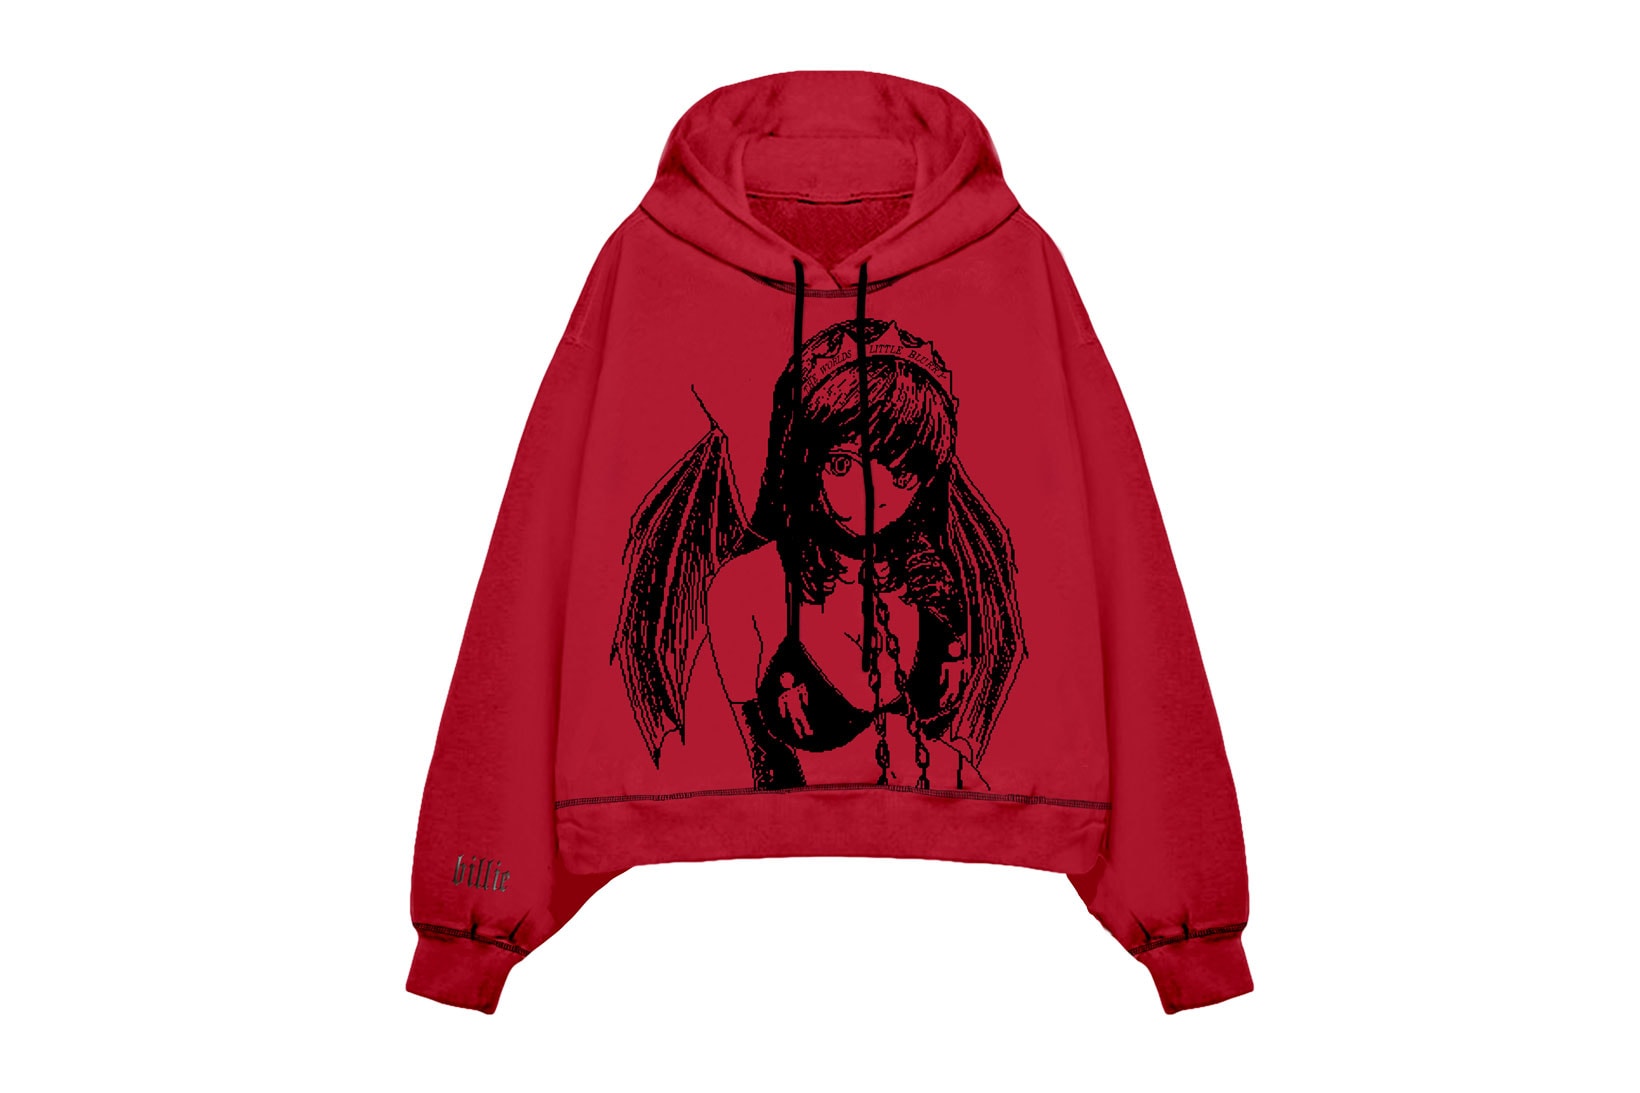 billie eilish blohsh merch the worlds a little blurry documentary collection hoodies red black hoodie